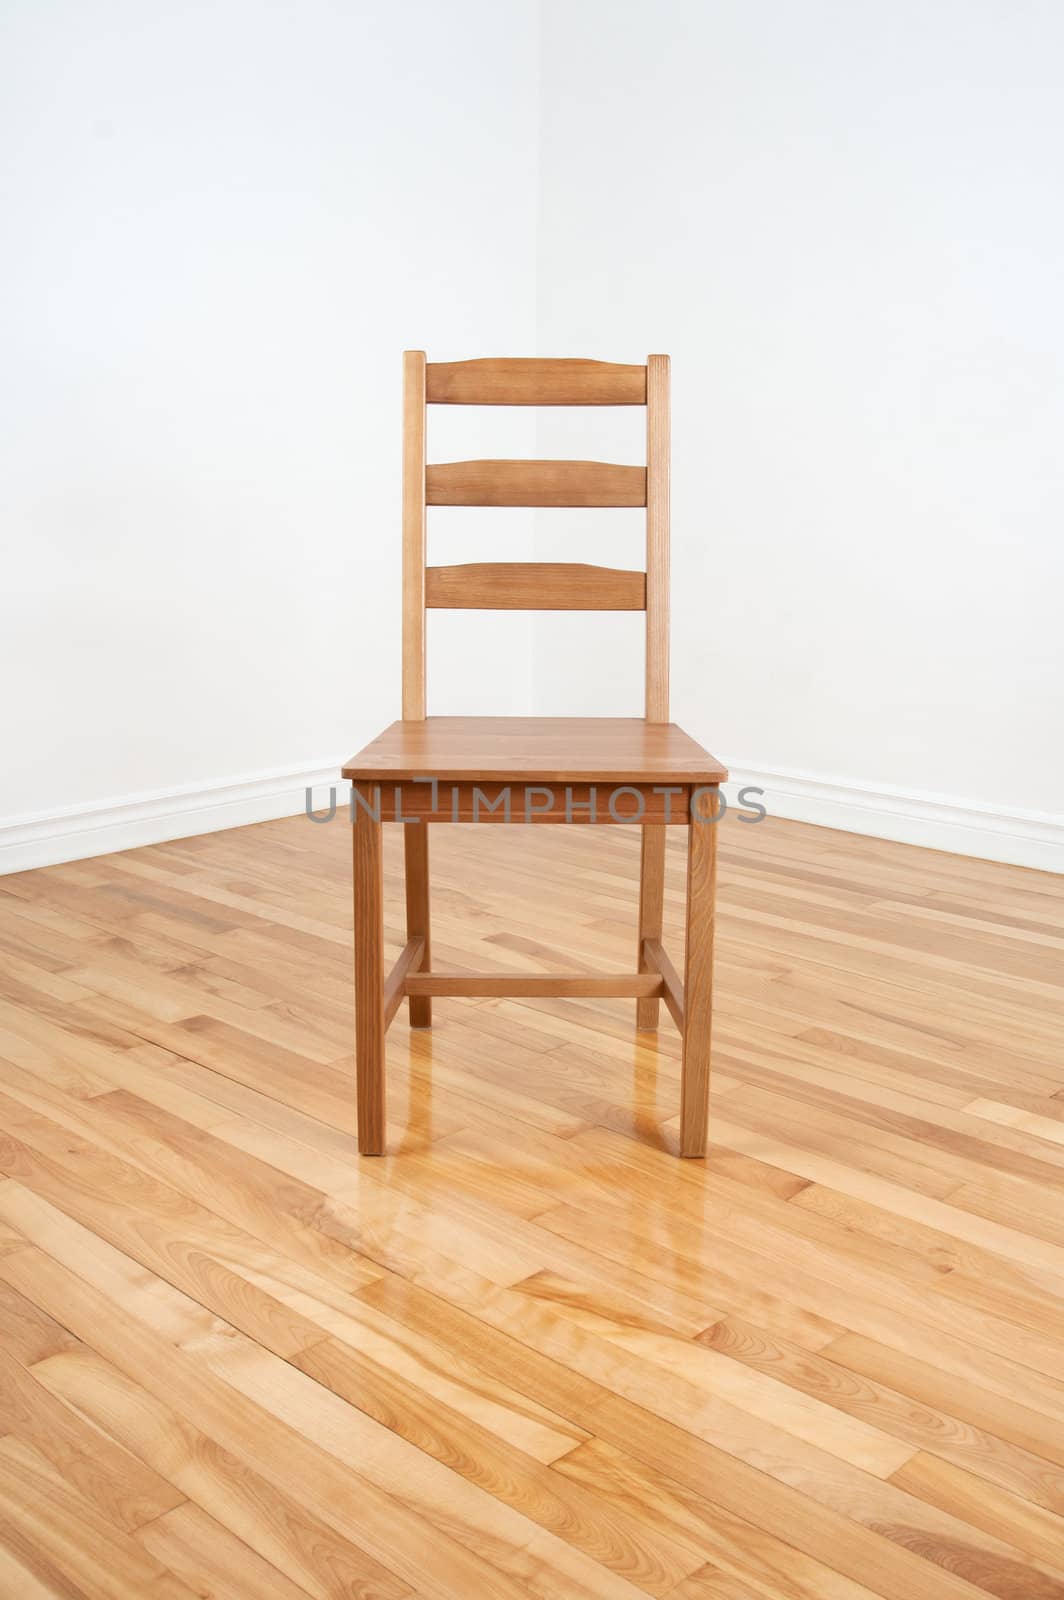 Wooden chair in the empty corner of a room with white walls and wooden floor.